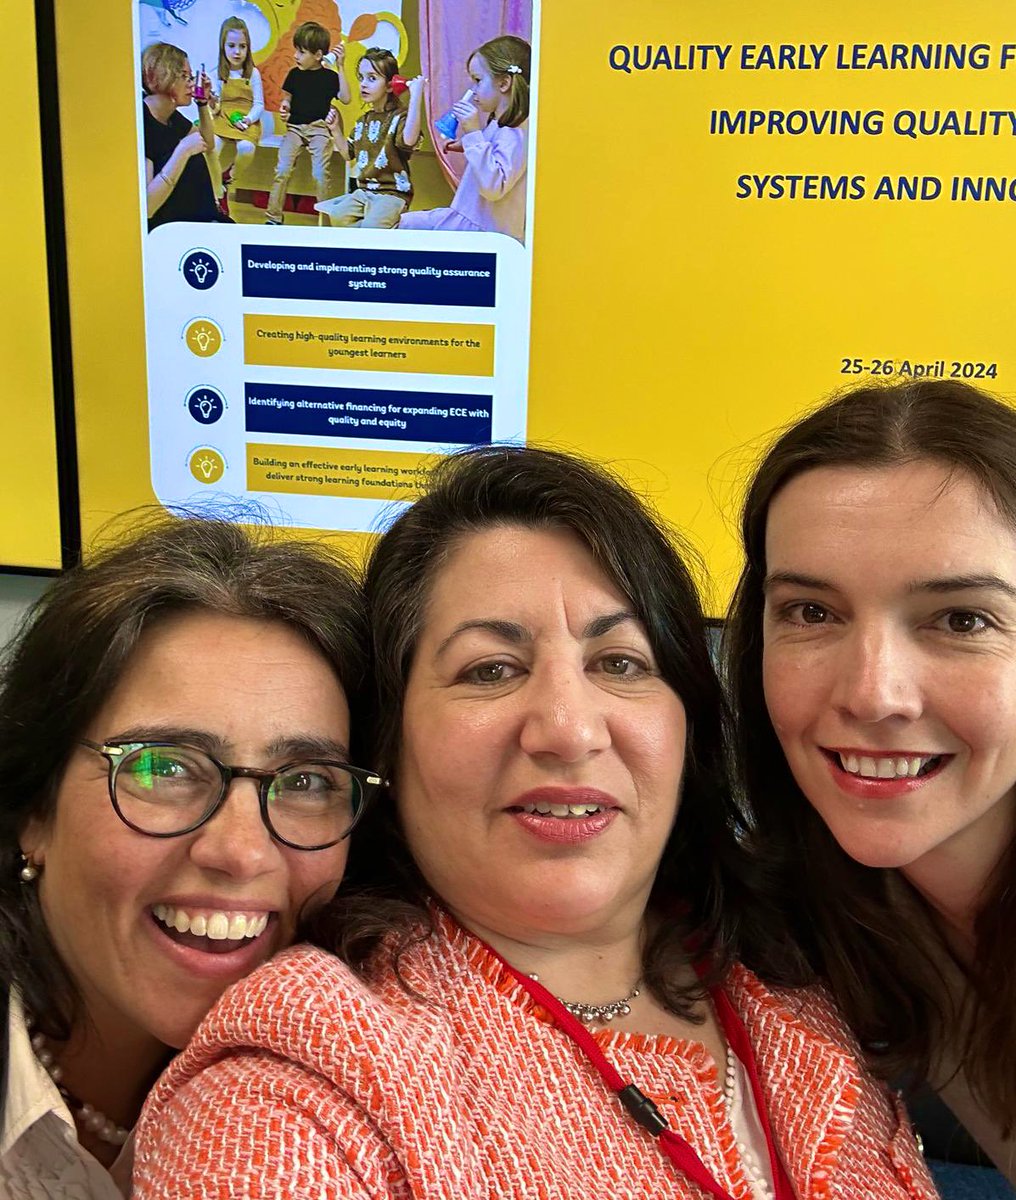 Proud to have these amazing colleagues at @WBG_Education! 

They successfully delivered Education Policy Academies for 100+ in person policymakers across 20+ ECA countries! Reenergizing exchange of good practices and networking to drive positive change. 

#TransformEducation